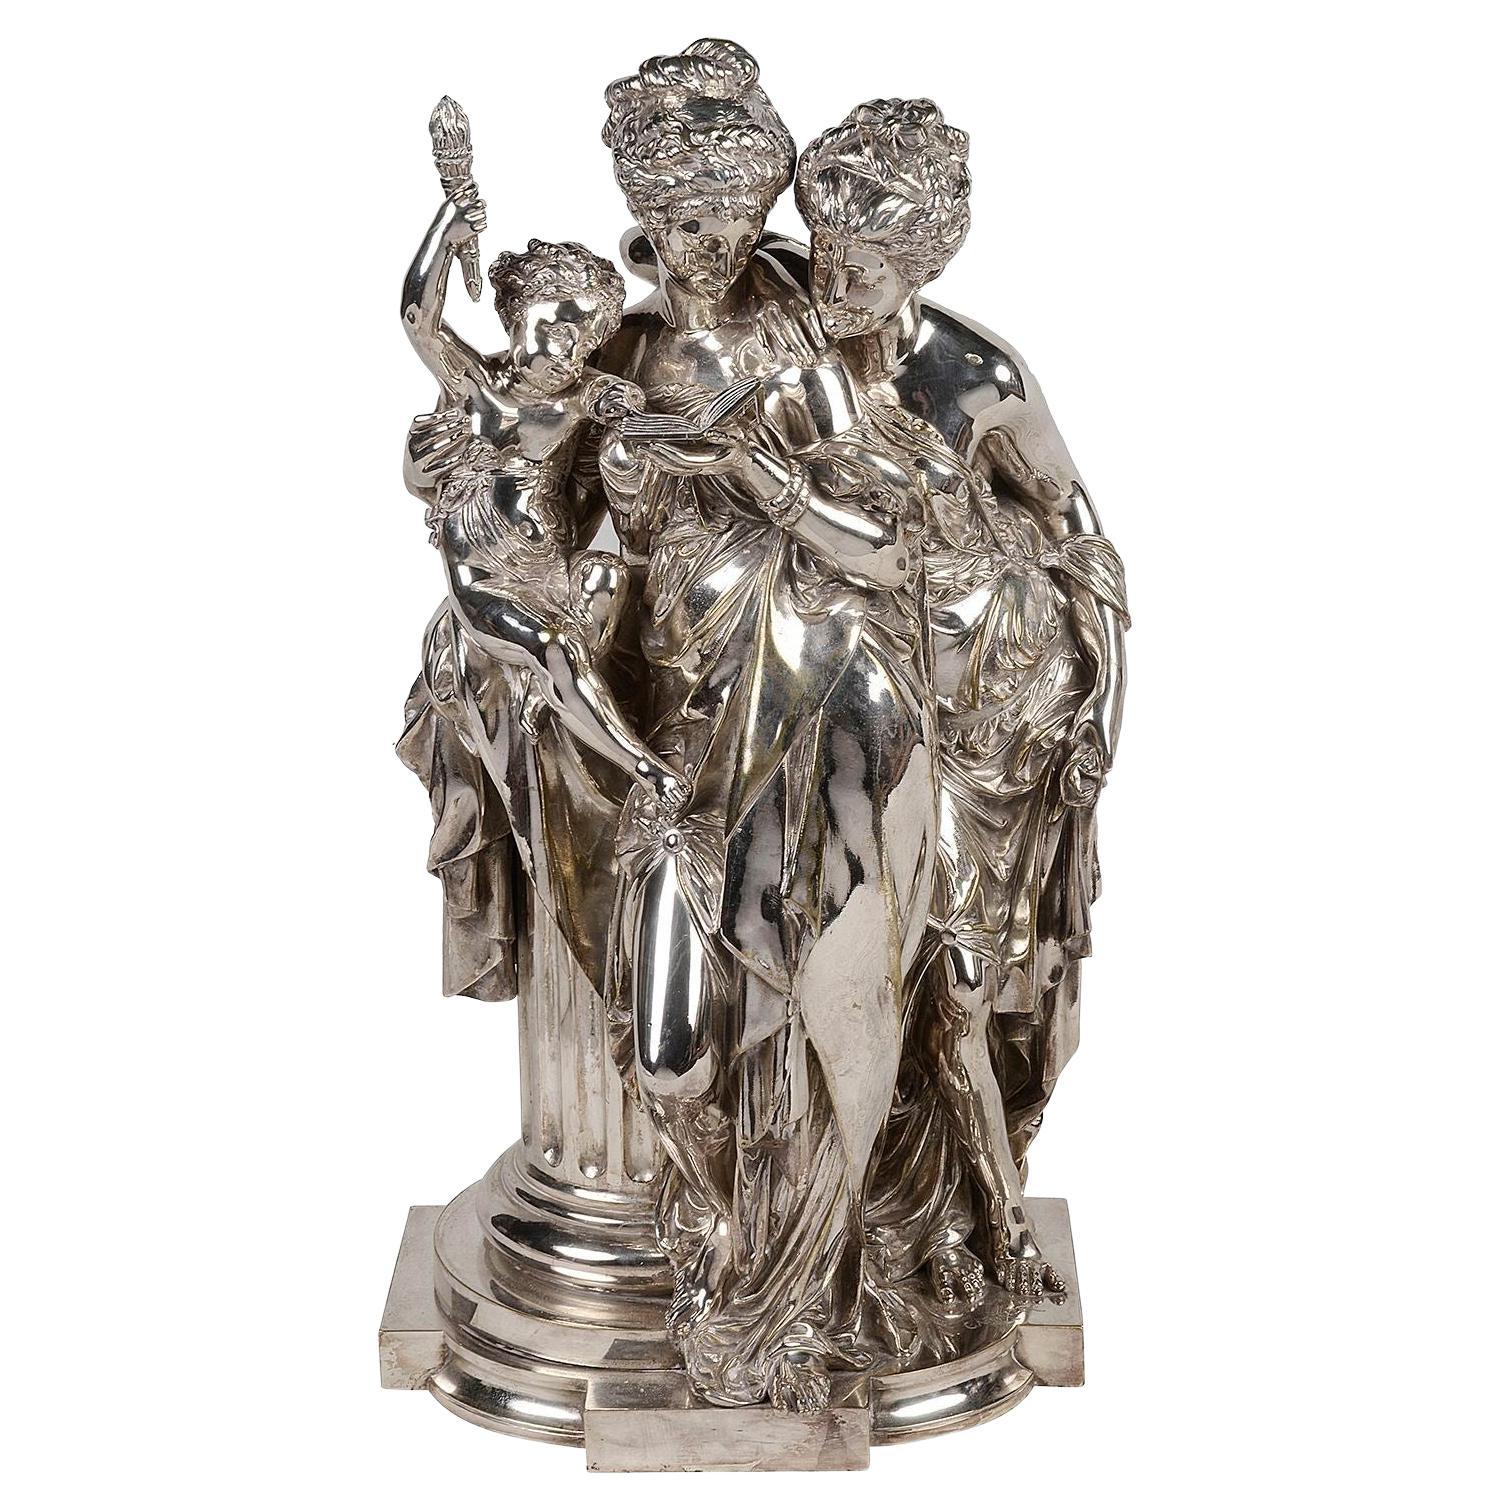 Silvered-Bronze Group 'the Reading' Carrier-Belleuse, 19th Century